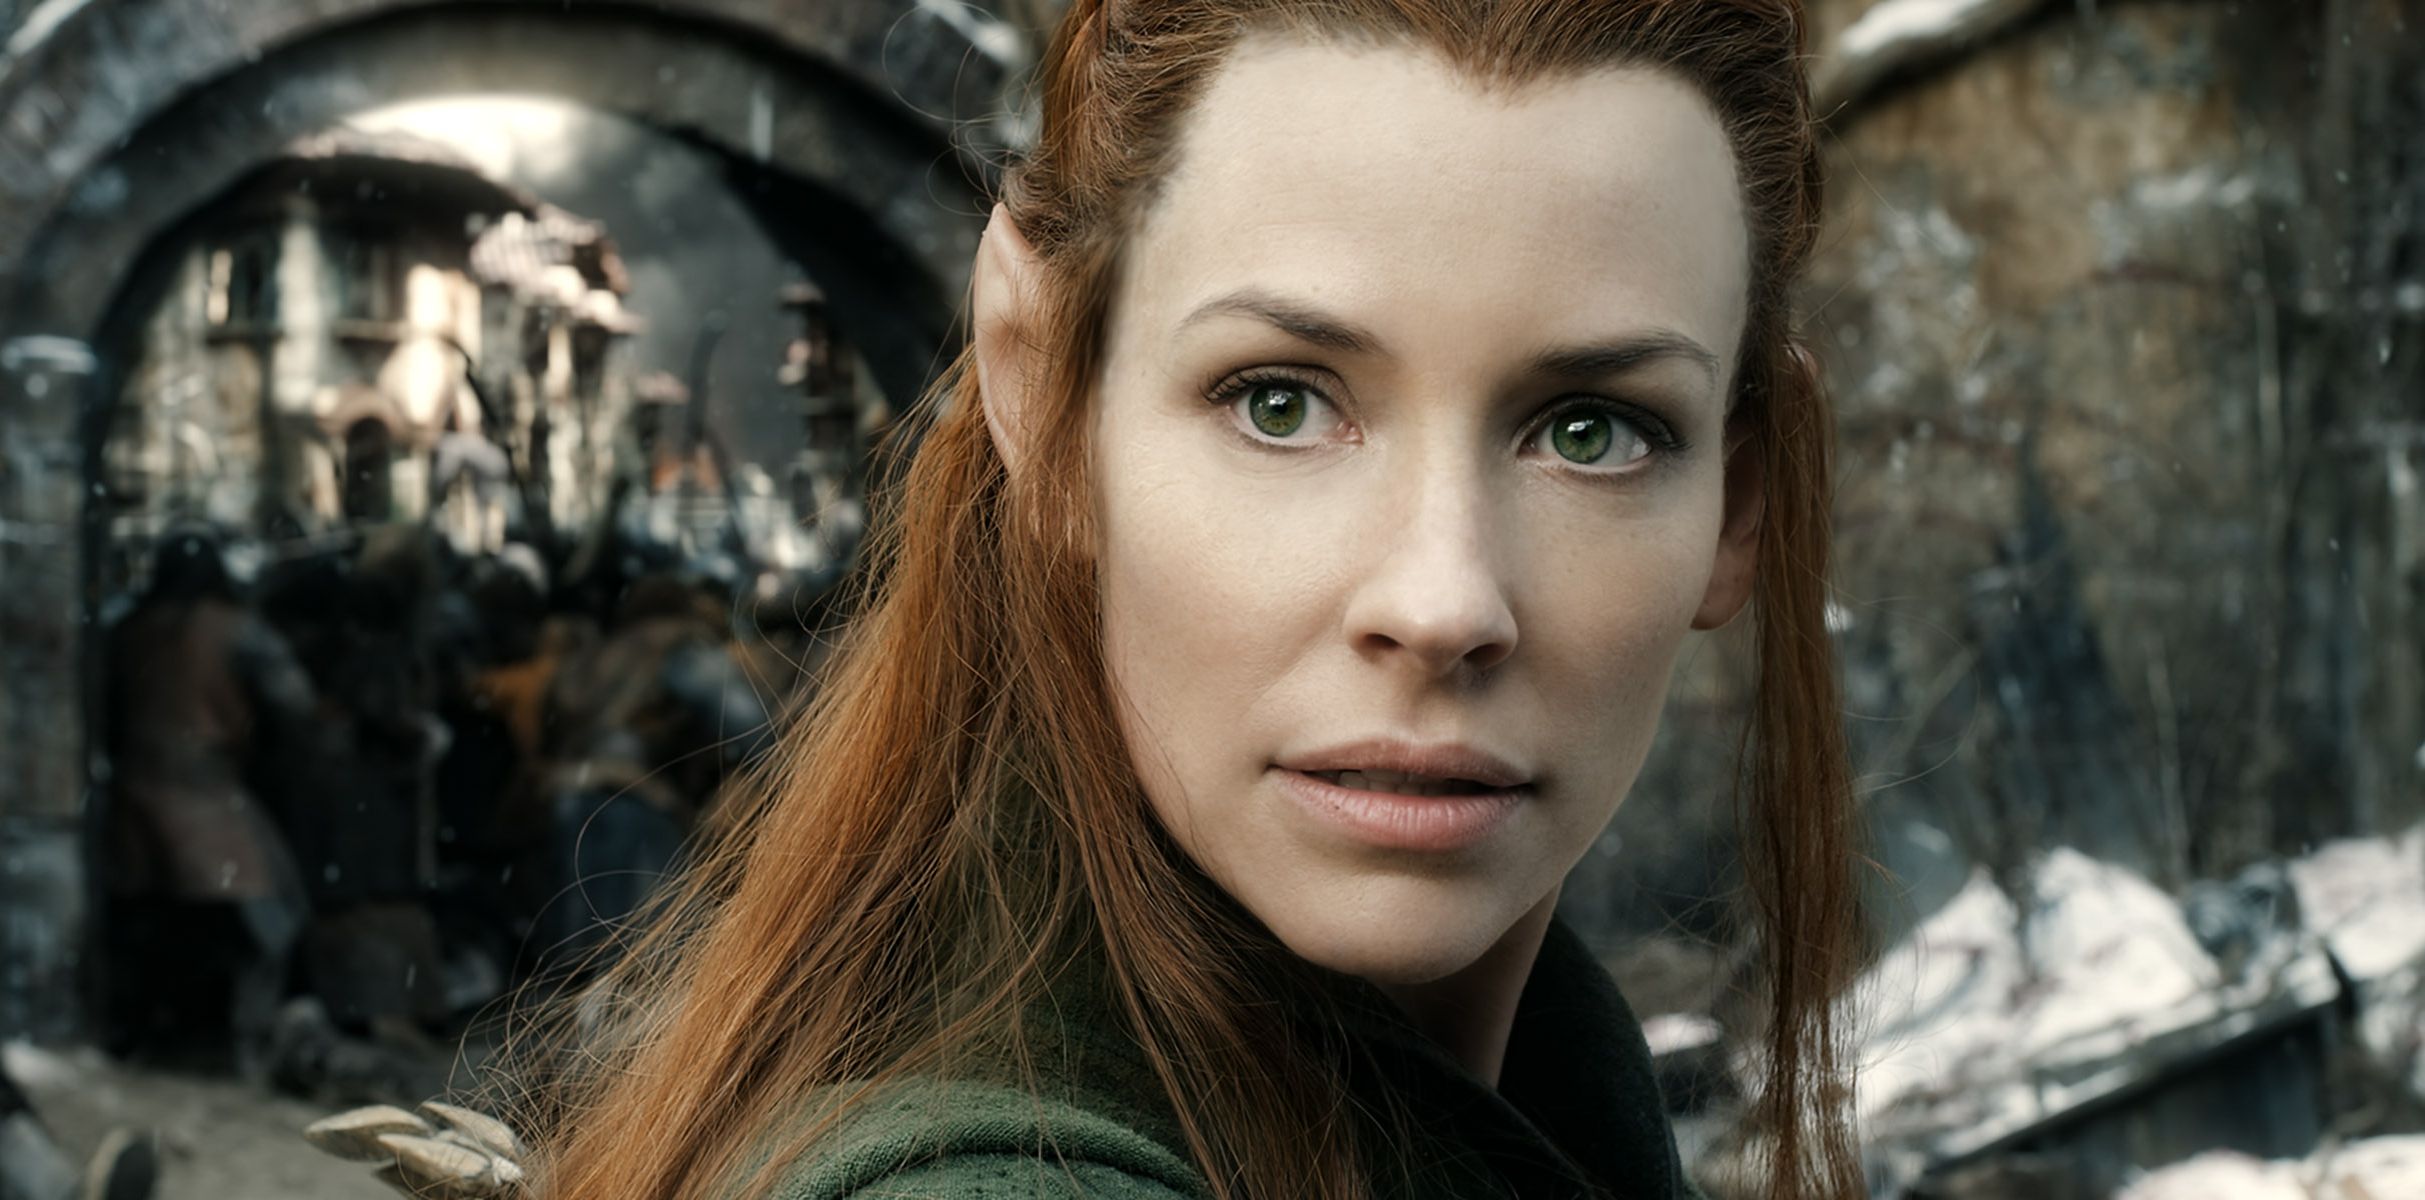 Evangeline Lilly as Tauriel close-up - The Battle of the Fiv